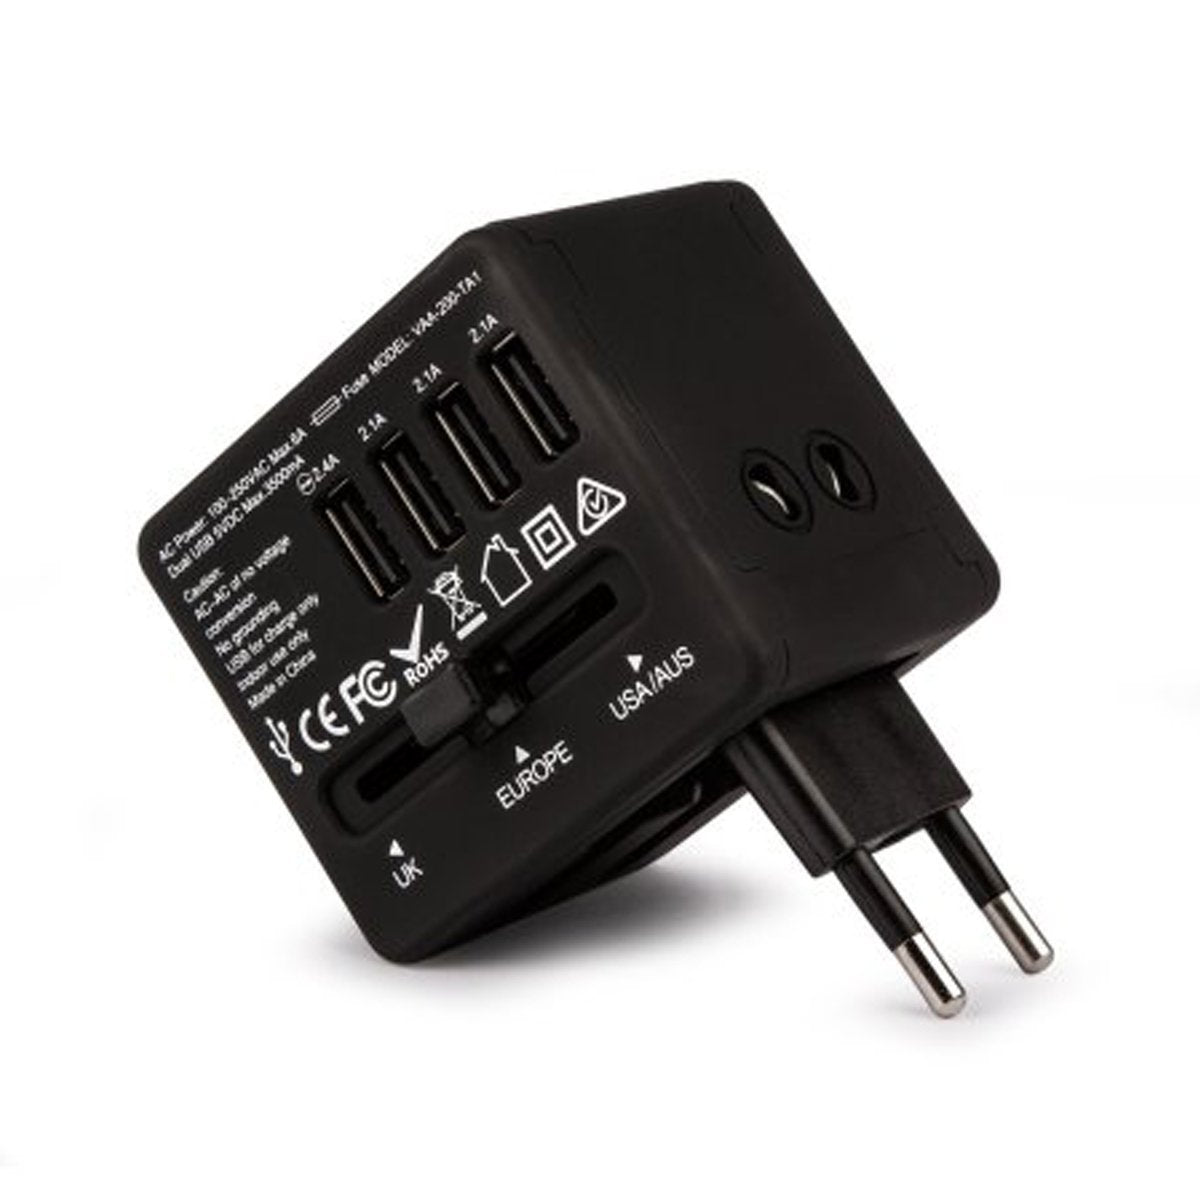 Veho TA-1 Universal 4-Port USB World Travel Mains Charger 3.5A - Black - RueZone Charger Default